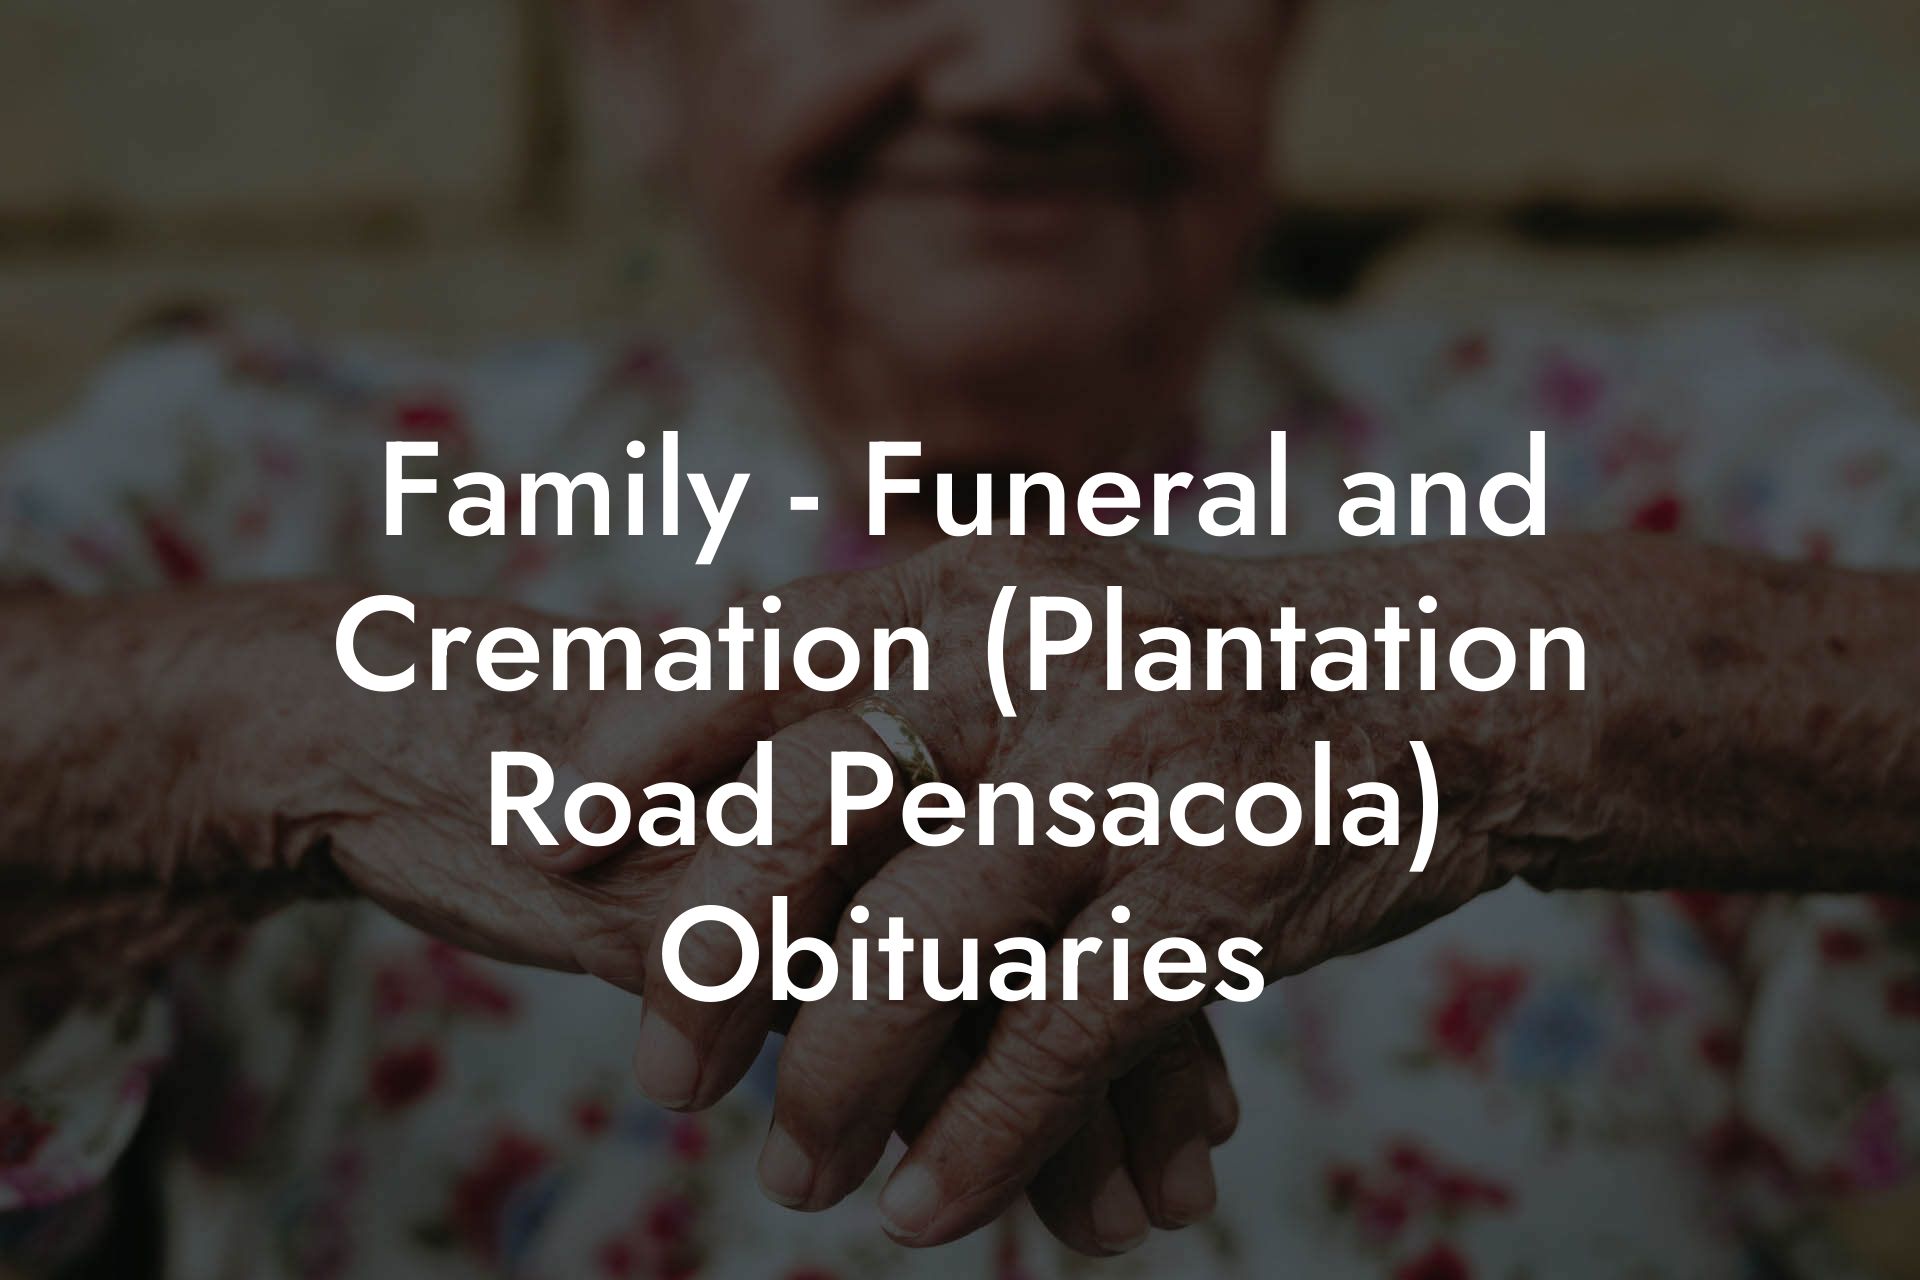 Family - Funeral and Cremation (Plantation Road Pensacola) Obituaries